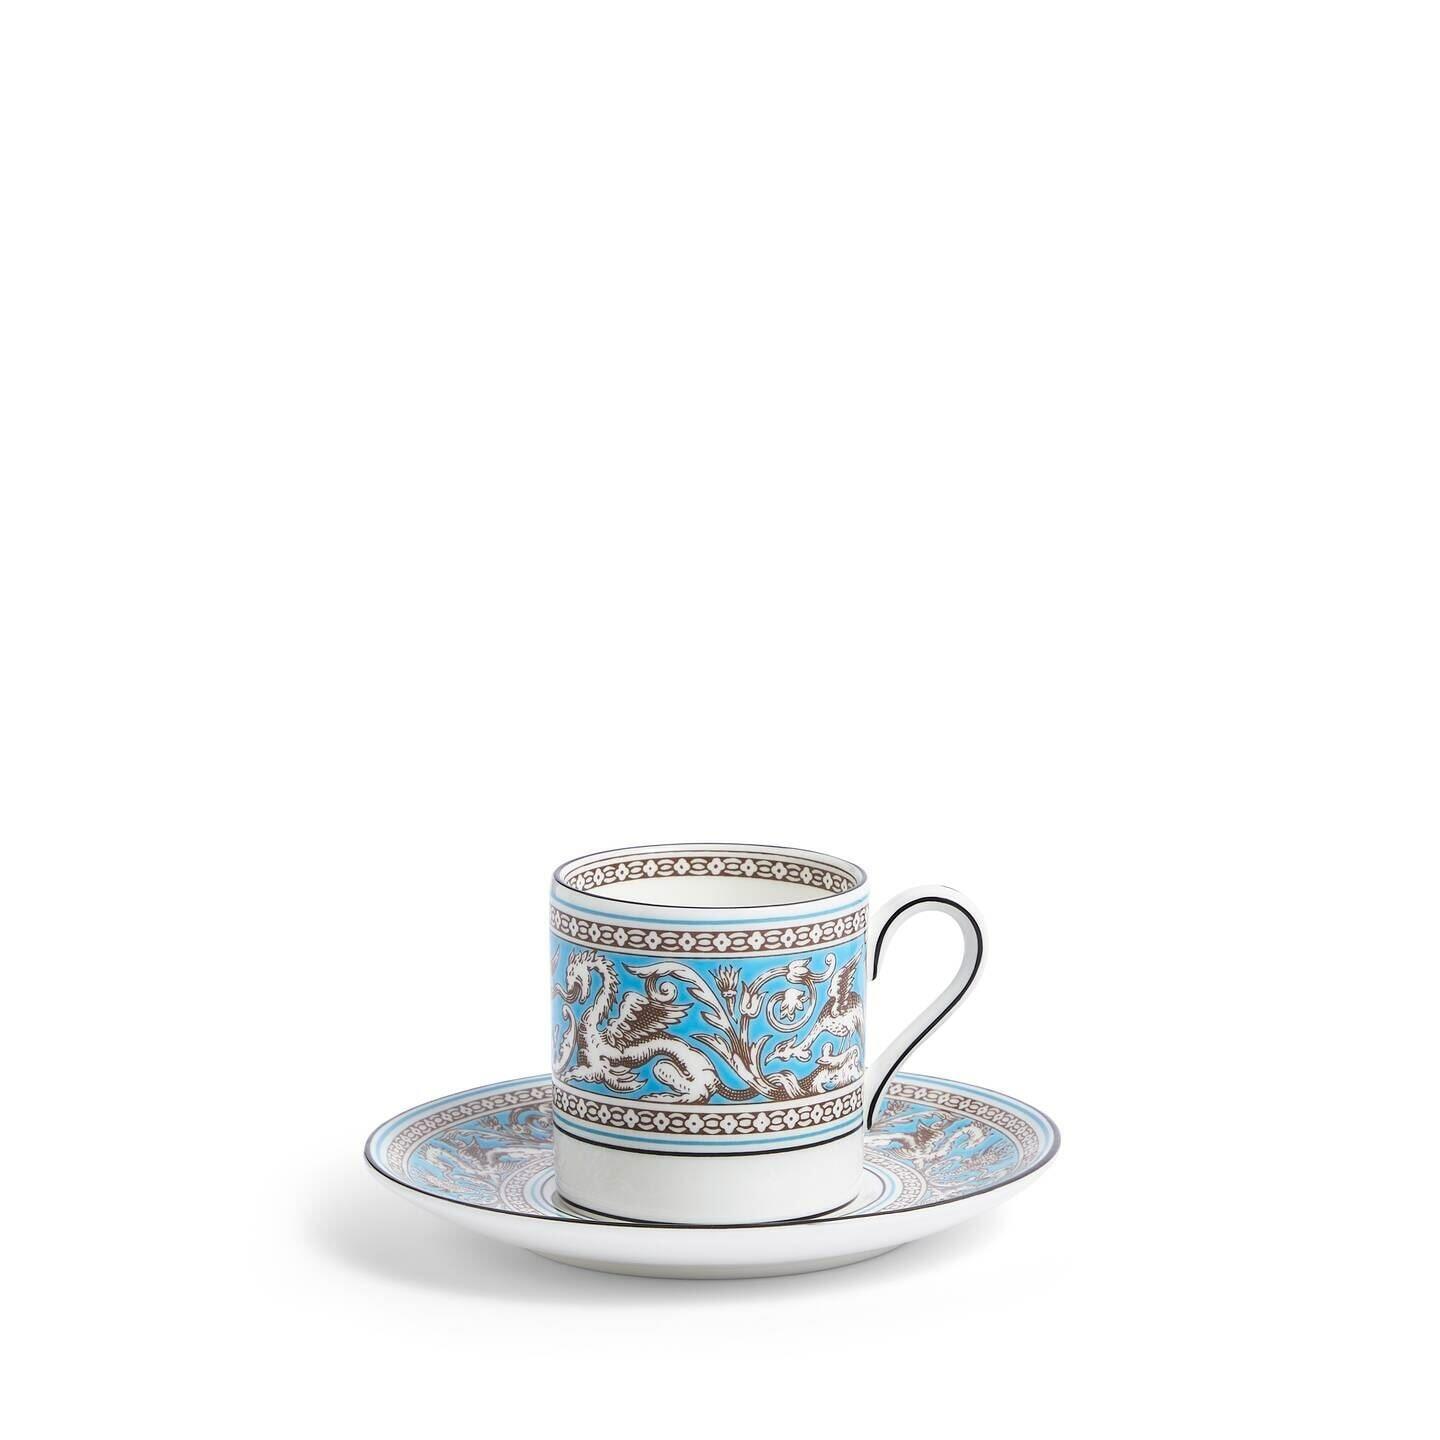 Wedgwood Florentine Turquoise Coffee Cup and Saucer